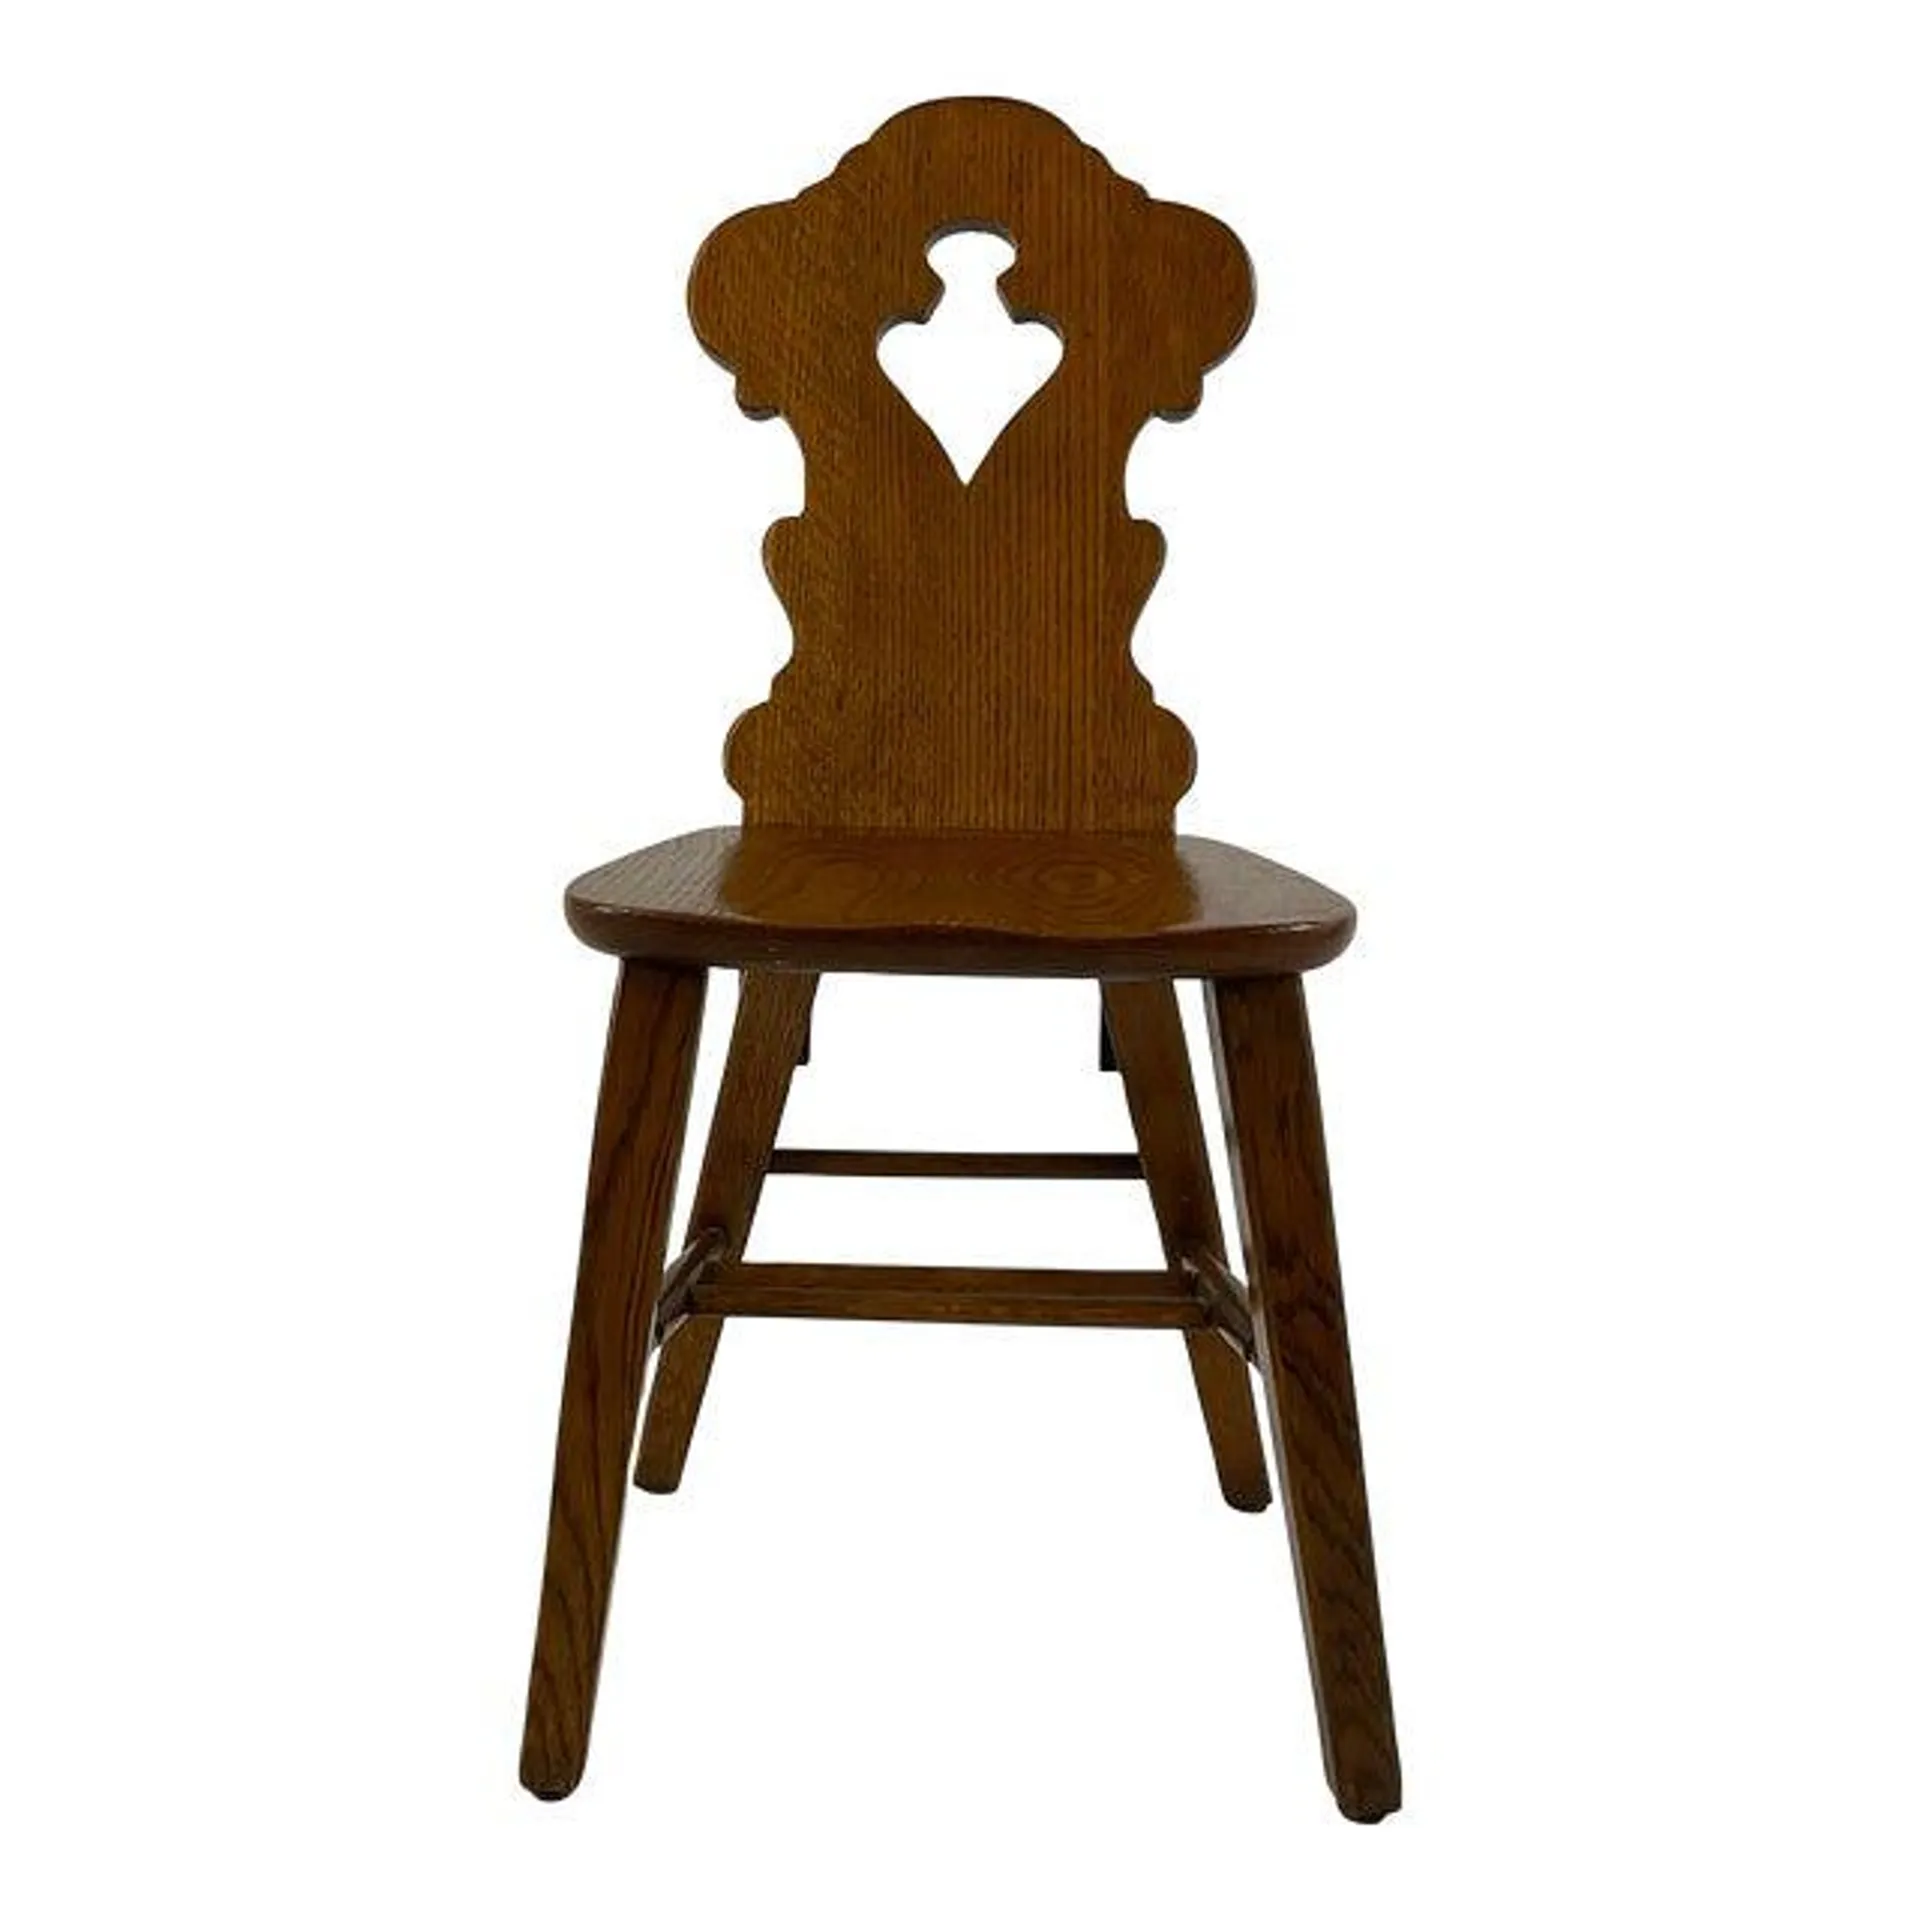 Late 1800s Swiss Chateau Oak Accent Chair